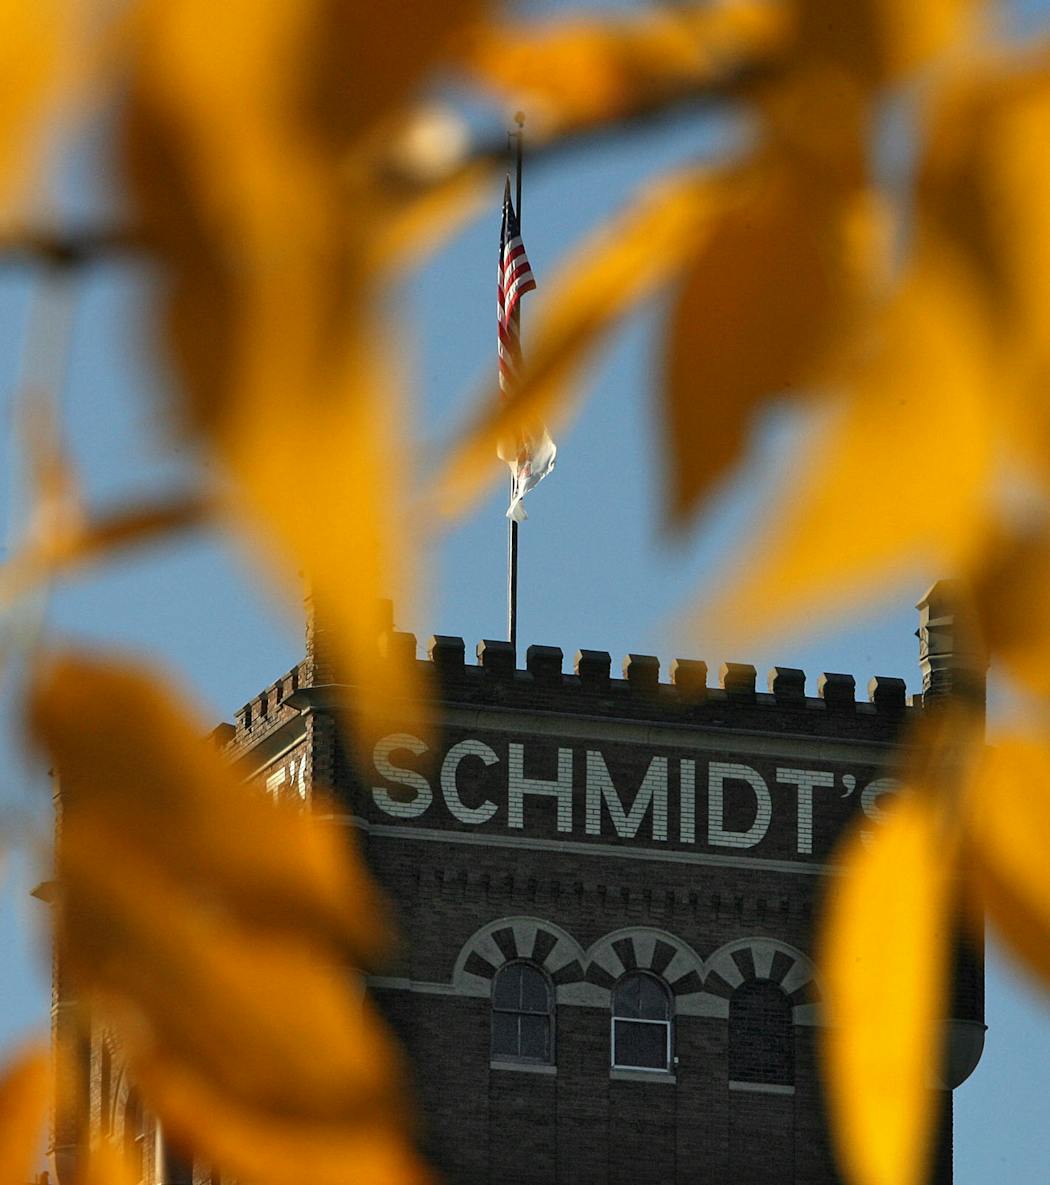 Remaking the former Schmidt Brewery produced residential and retail components.